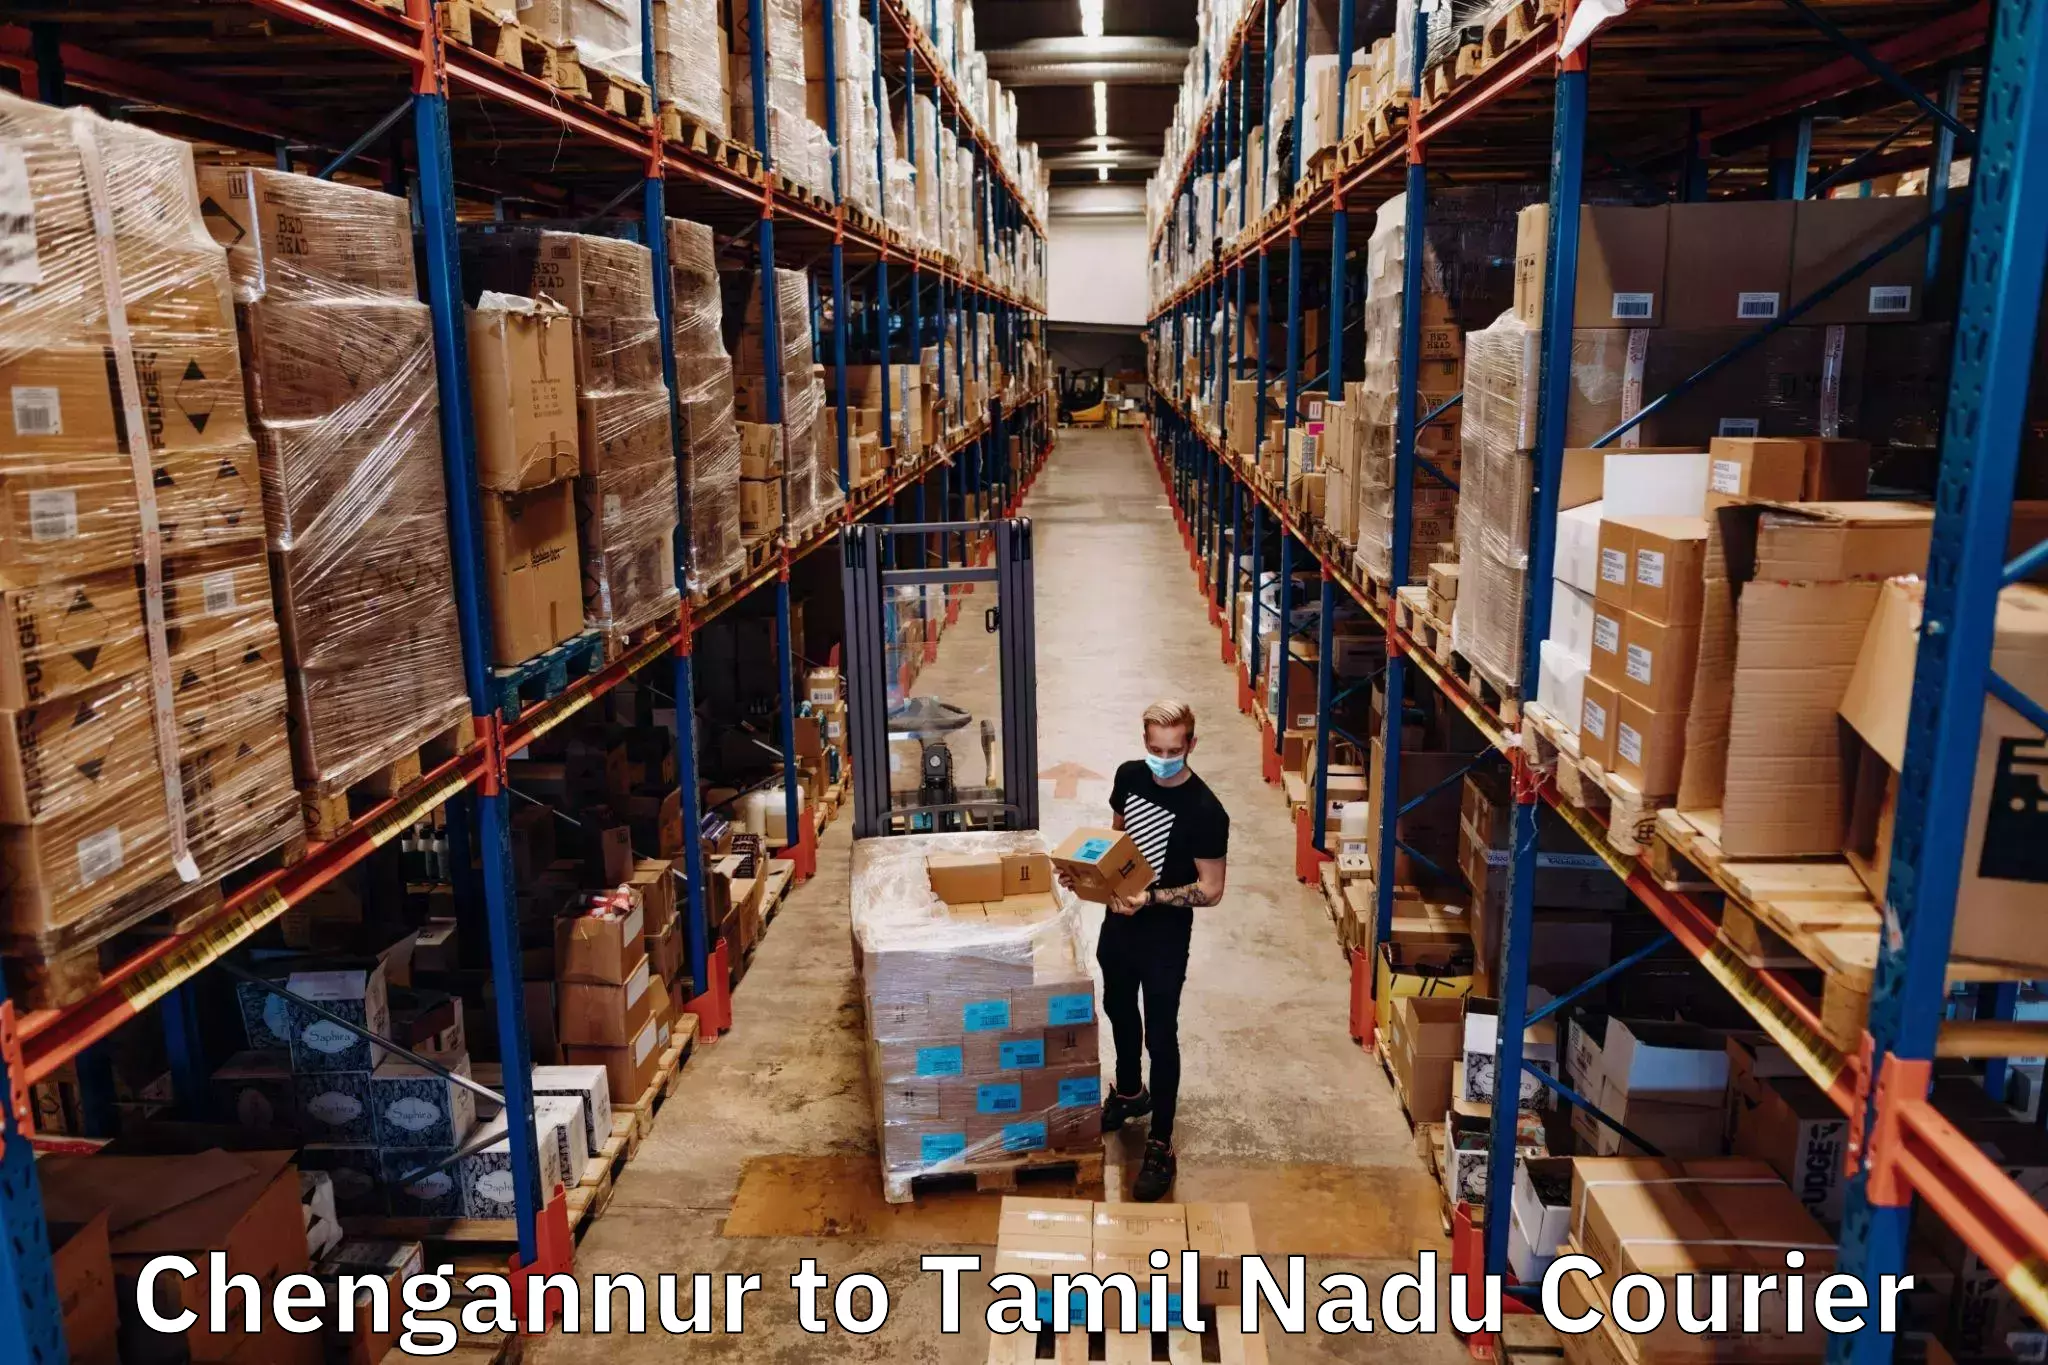 Subscription-based courier Chengannur to Tamil Nadu